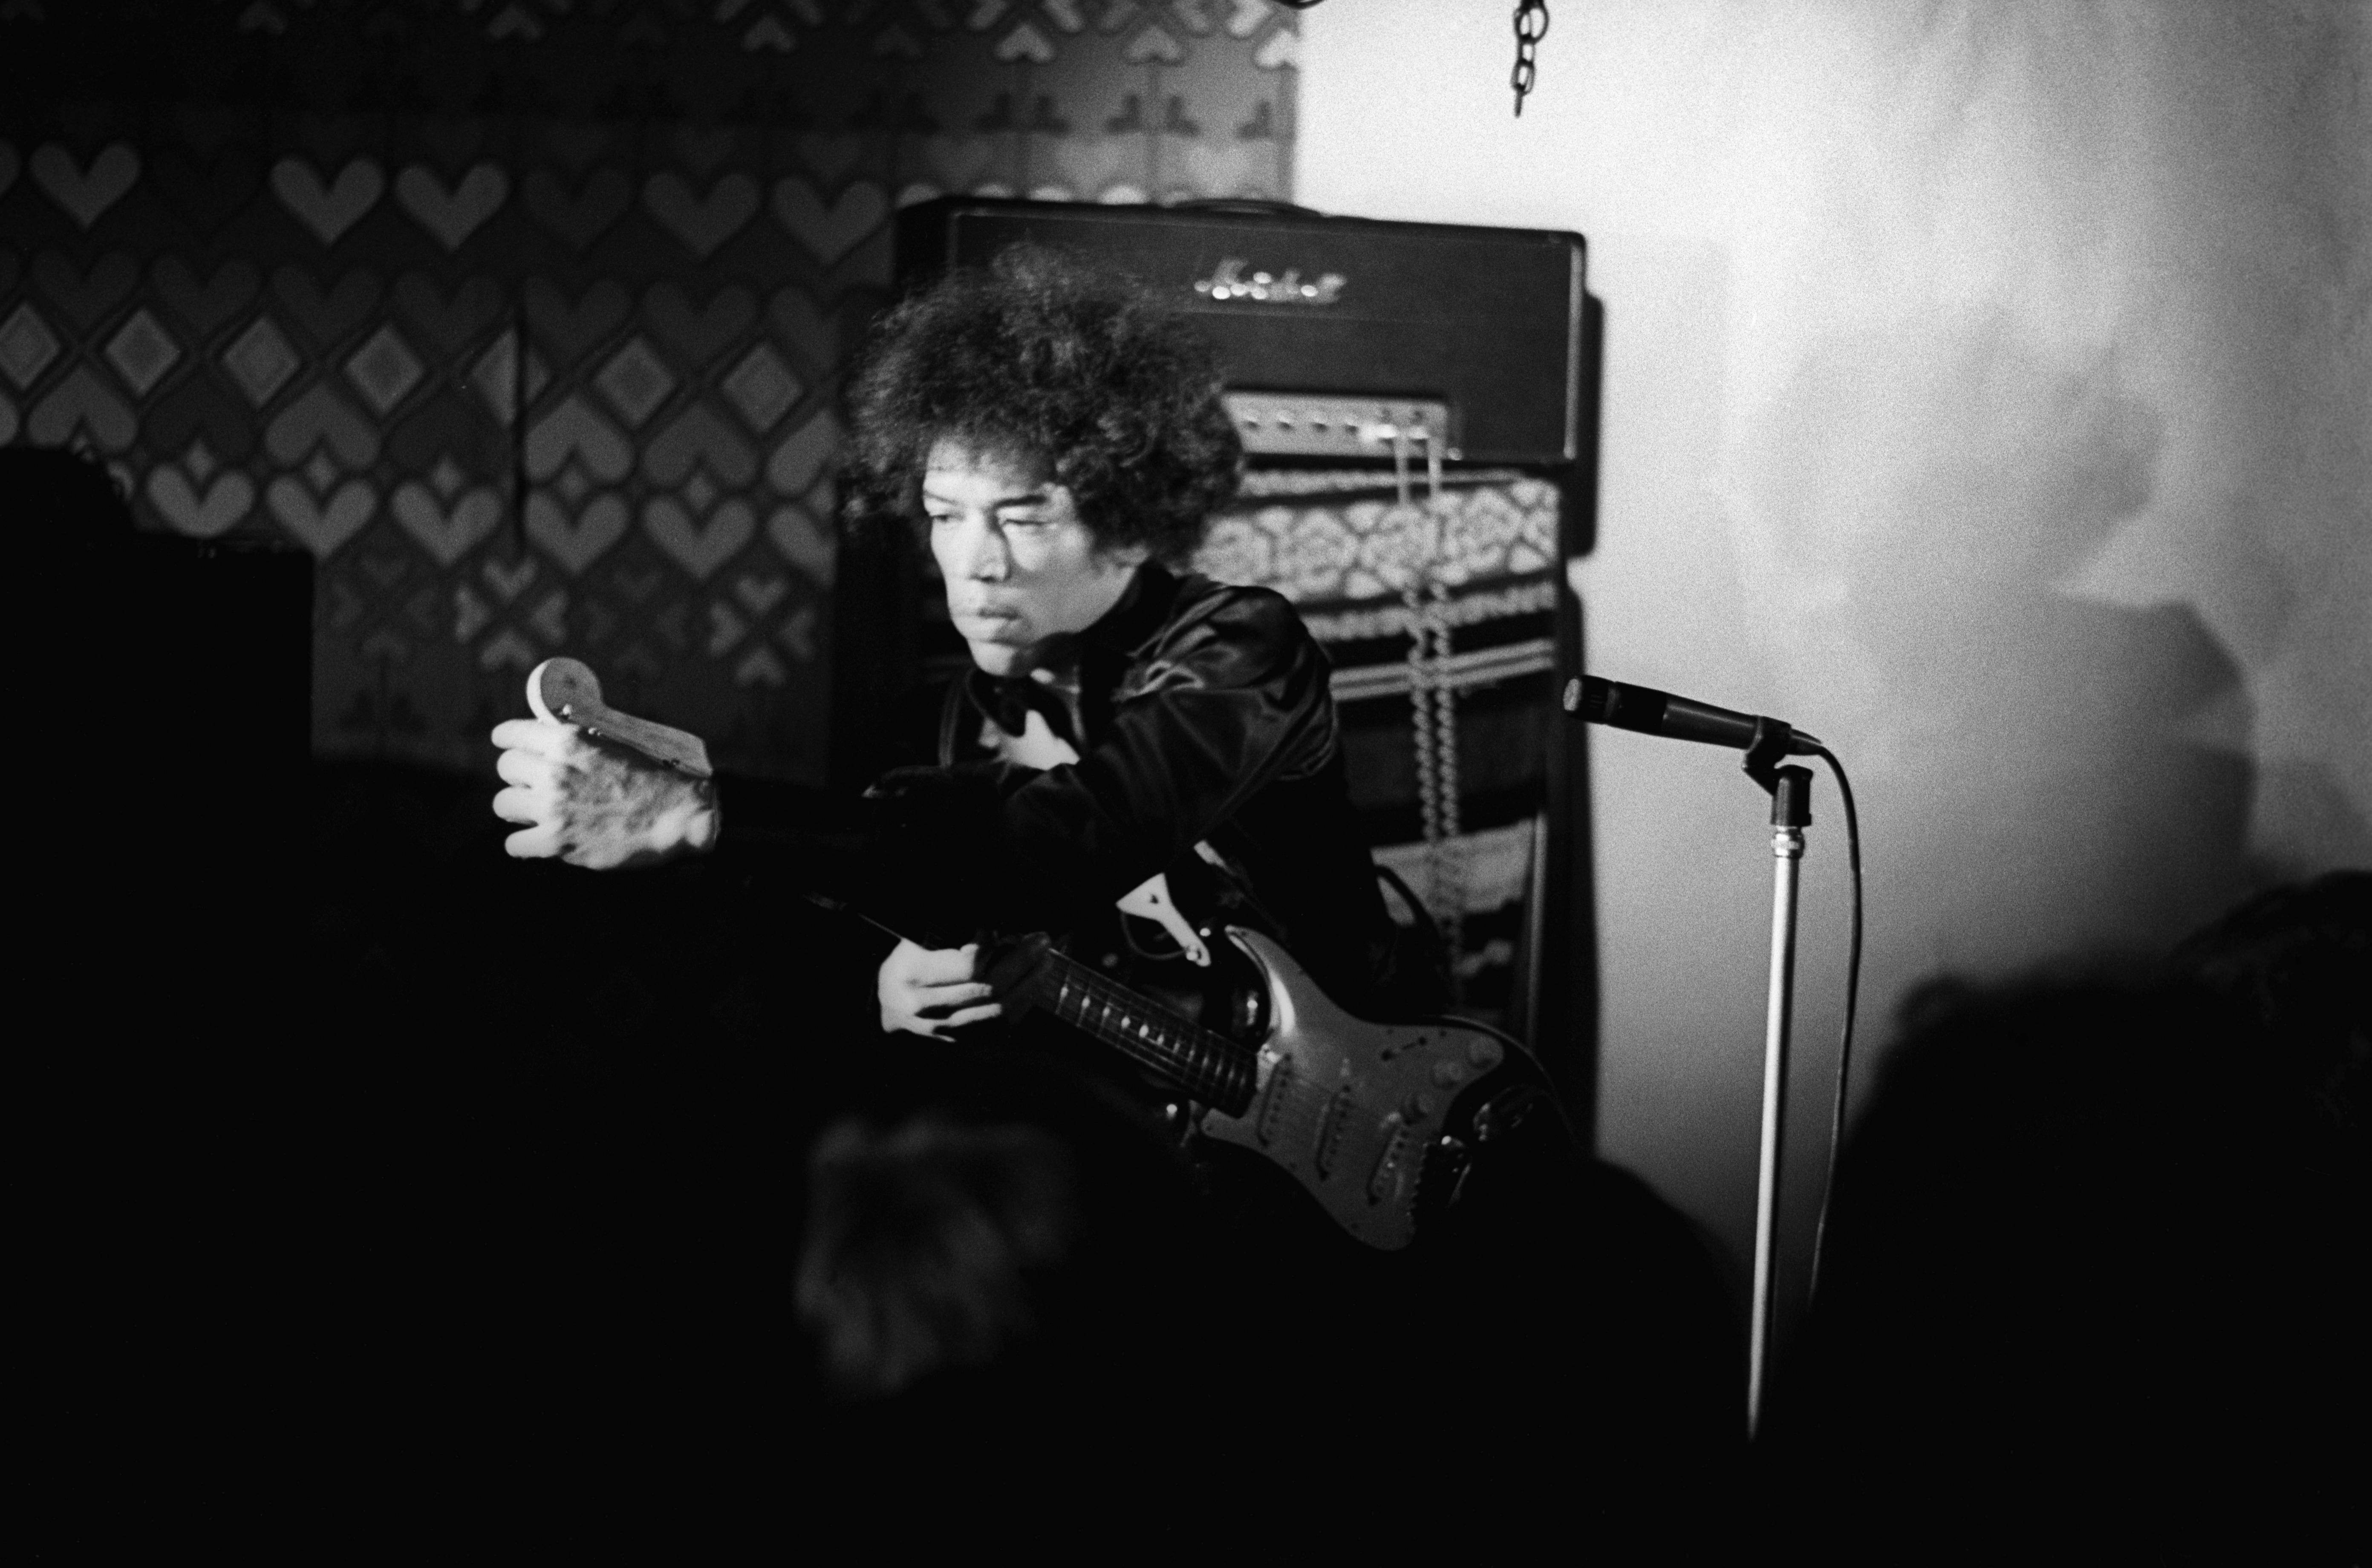 Jimi Hendrix tunes his guitar on stage in 1967.